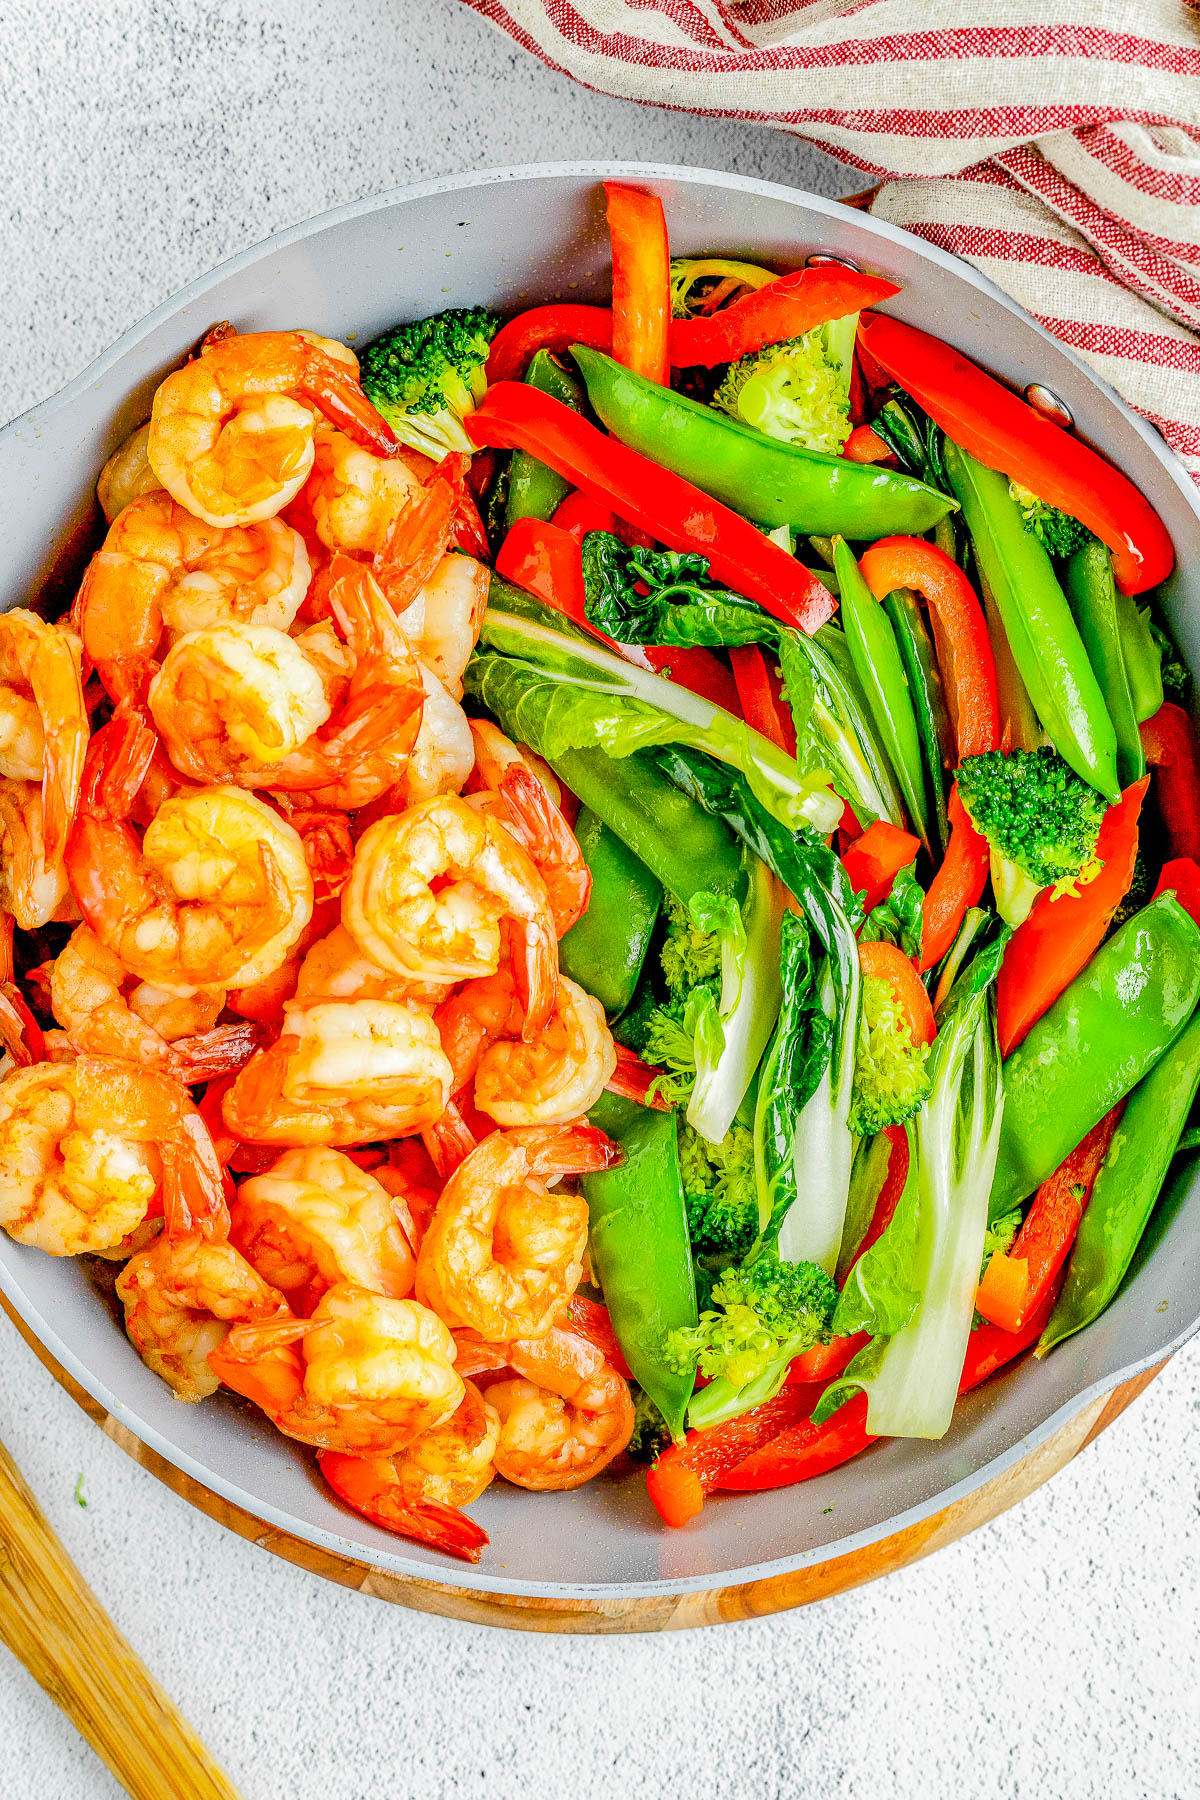 Garlic Shrimp Stir-Fry — Made with juicy shrimp, crisp-tender veggies, and a homemade stir-fry sauce, this stir-fry is QUICK and EASY! It’s ready in just 25 minutes and tastes so much better than takeout! Serve the stir-fry with noodles or rice for a complete meal.